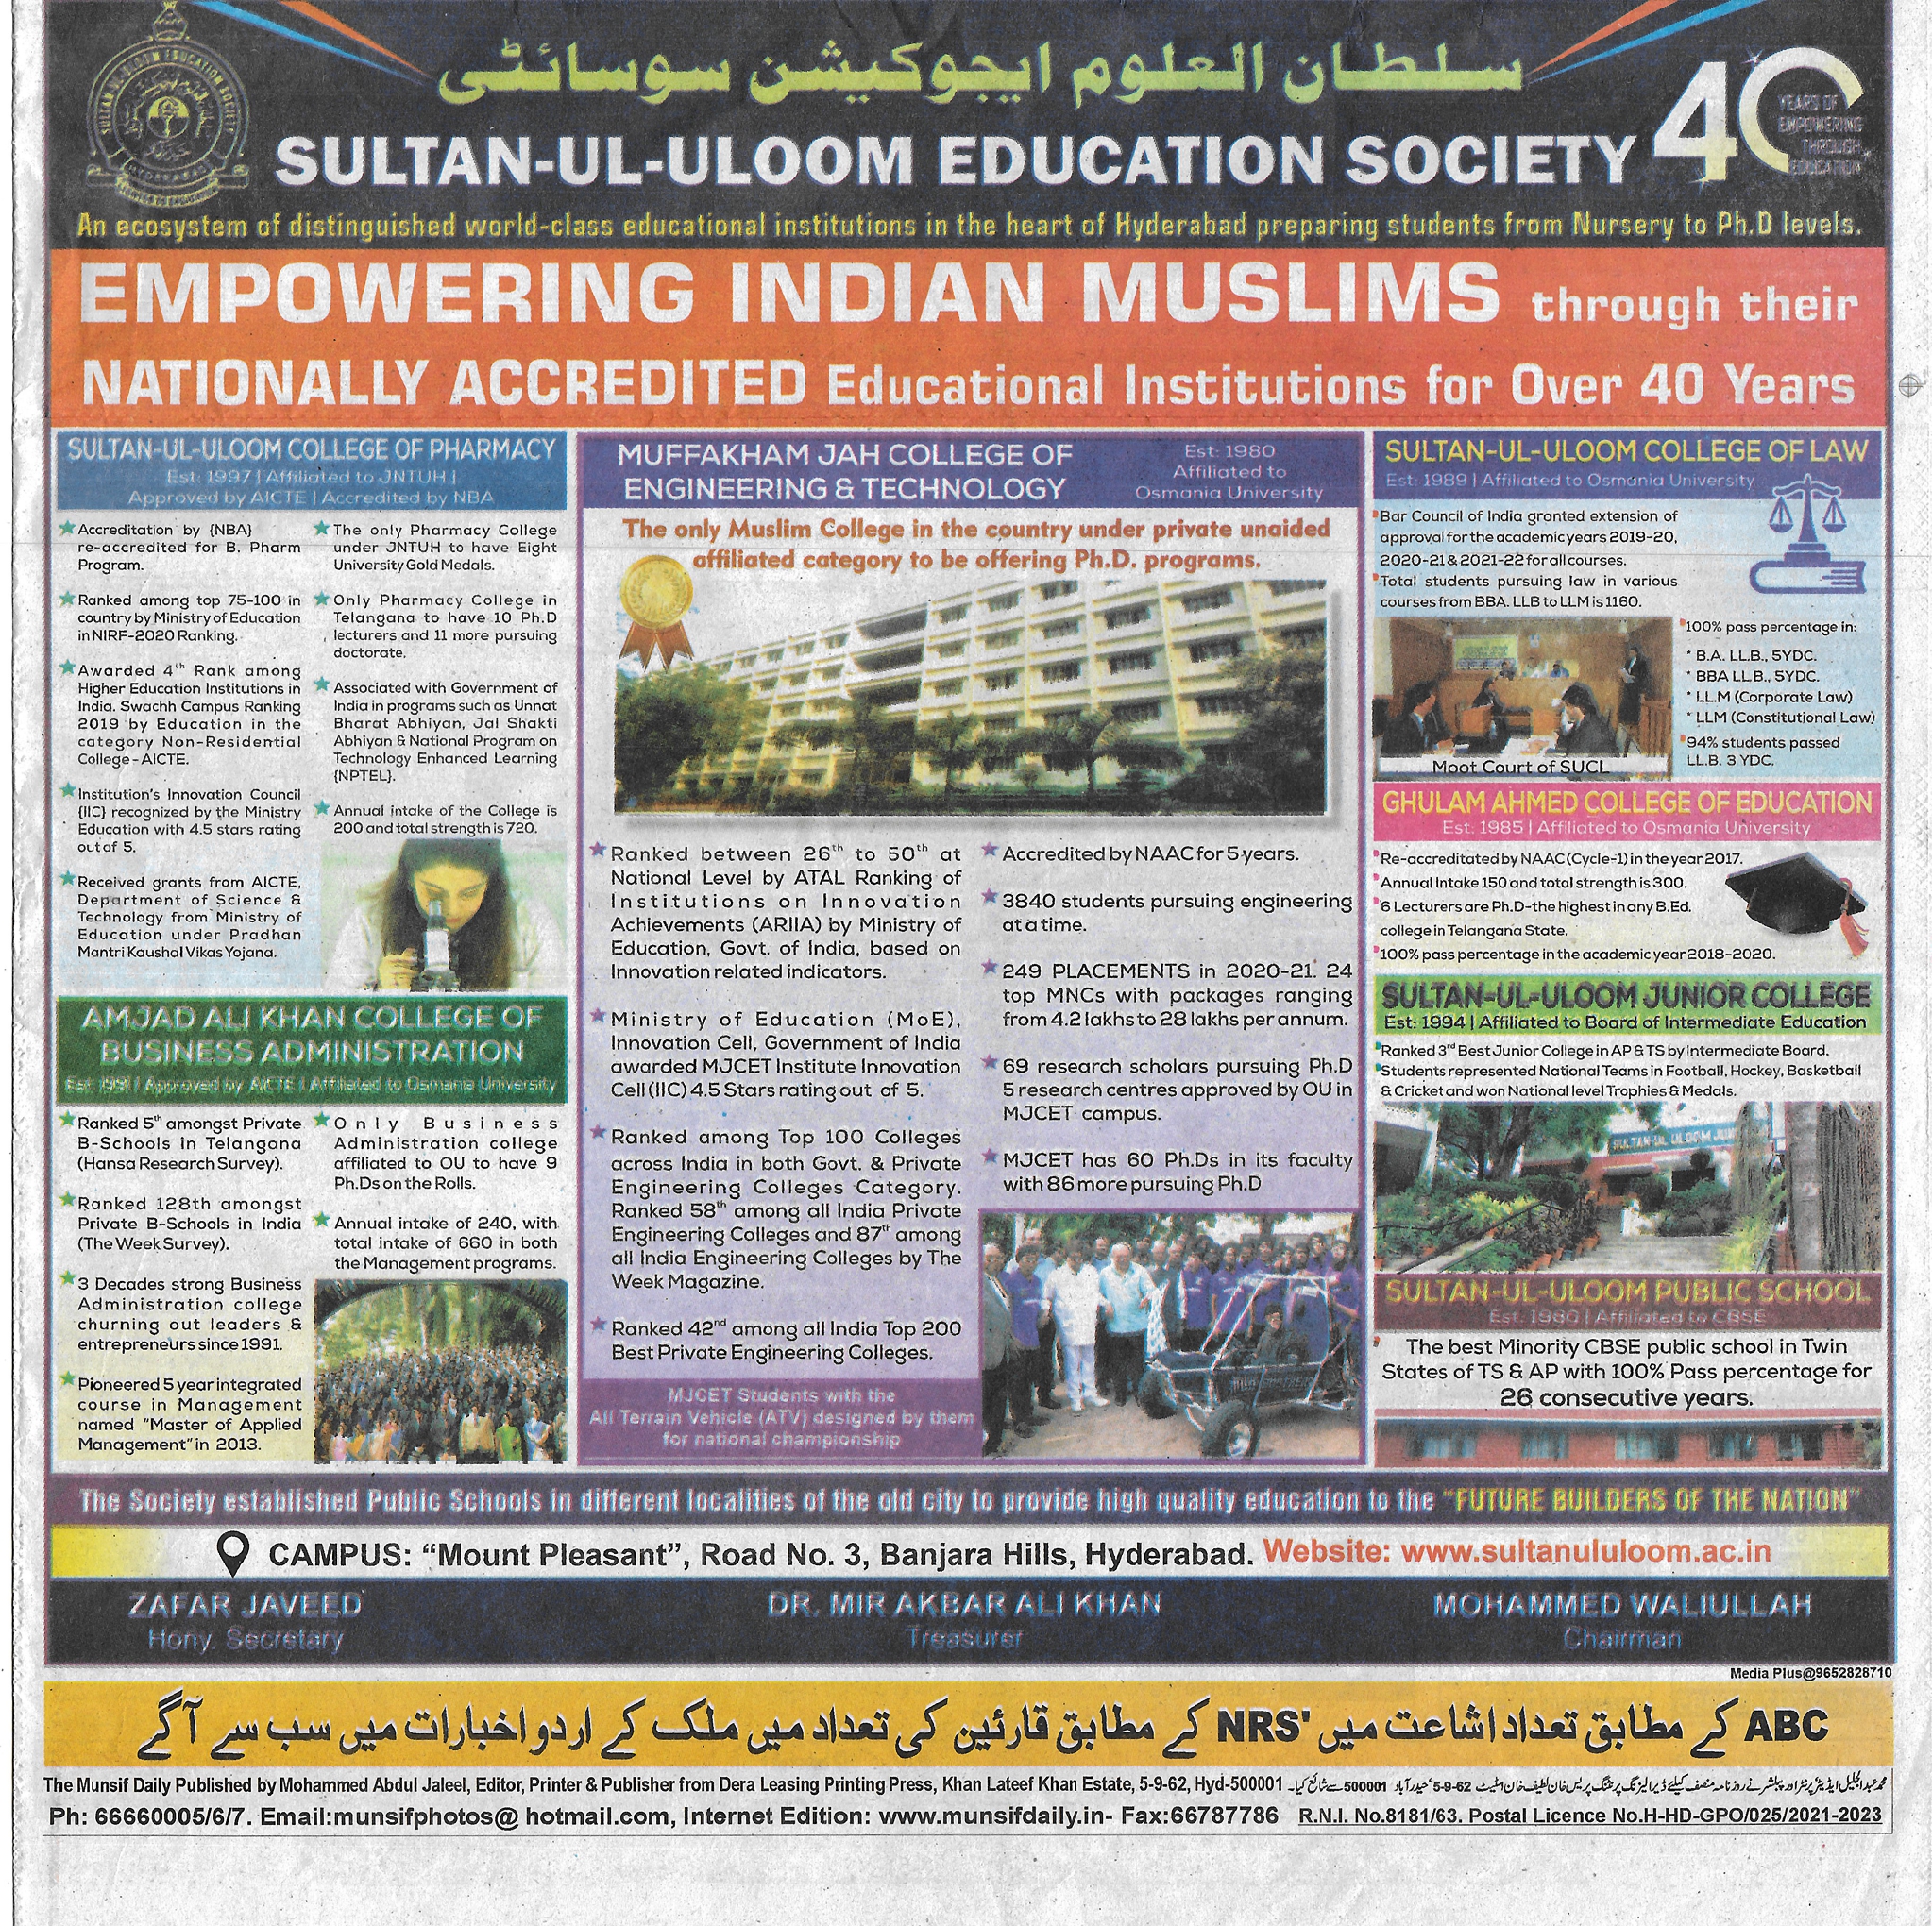 Sultan-ul-Uloom Education Society Empowering Indian Muslims through their Nationally Accredited Educational Institutions for over 40 Years.